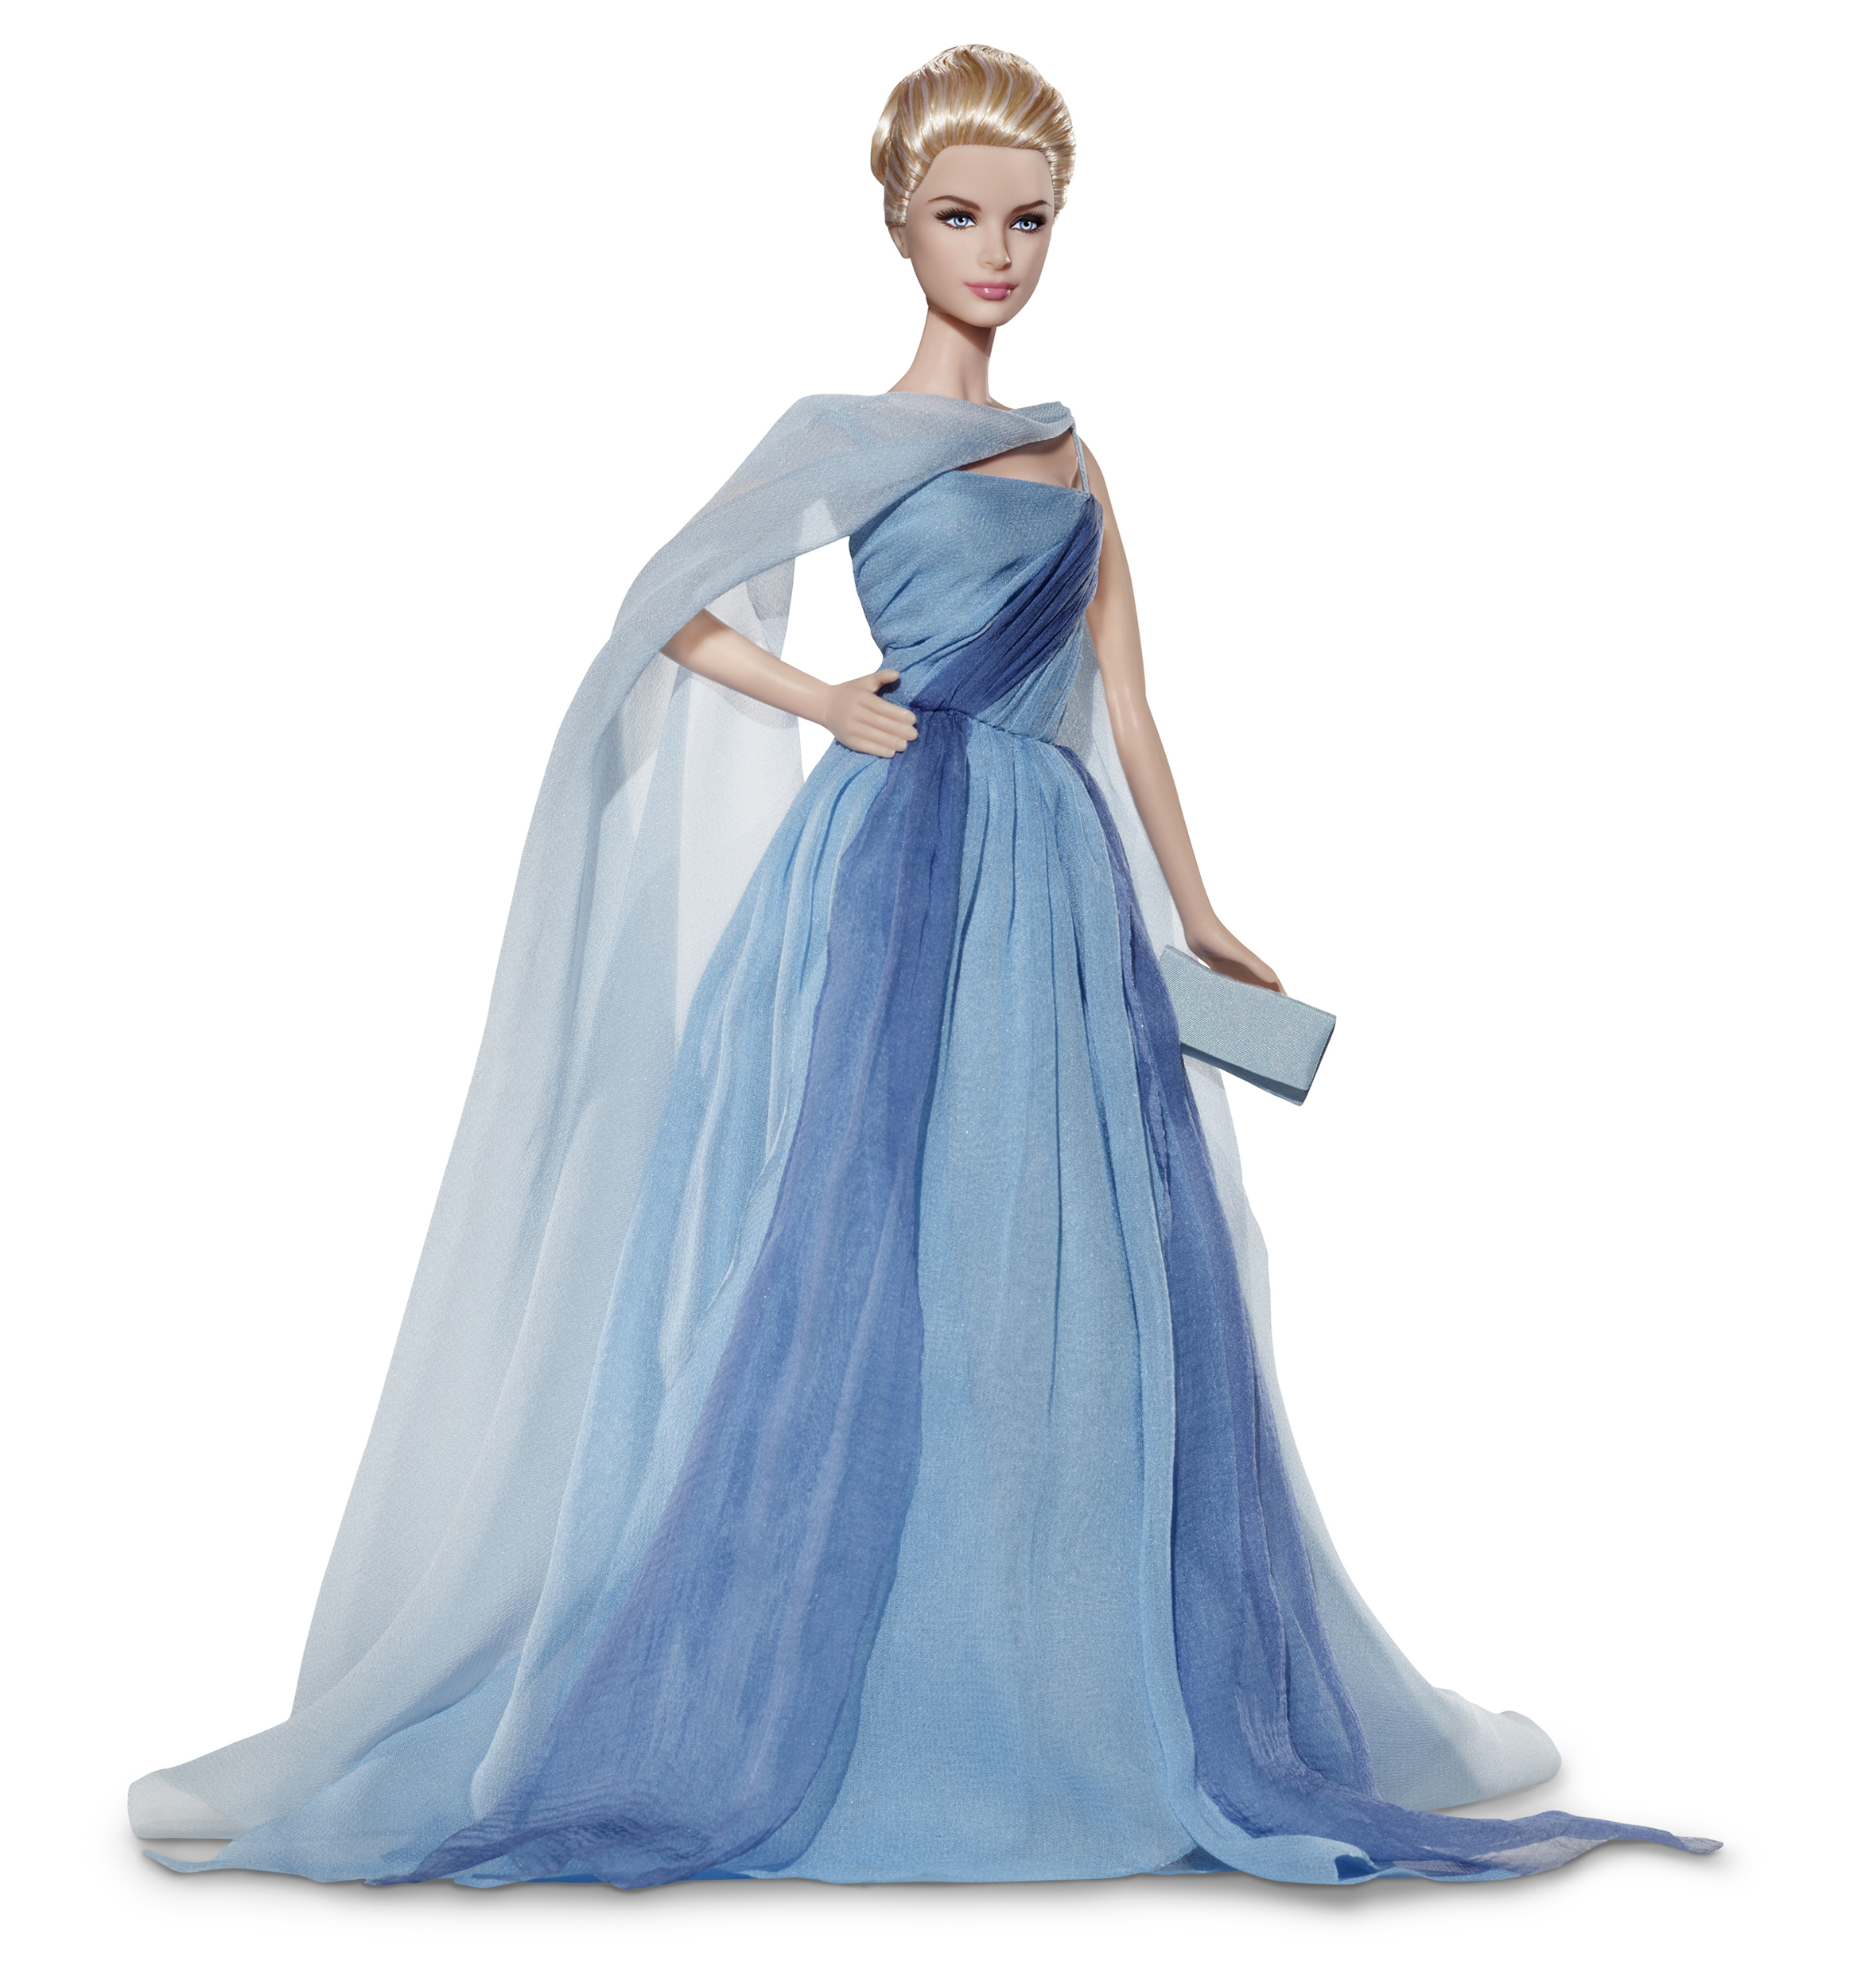 The Grace Kelly  To Catch A Thief  Barbie, released in 2011.